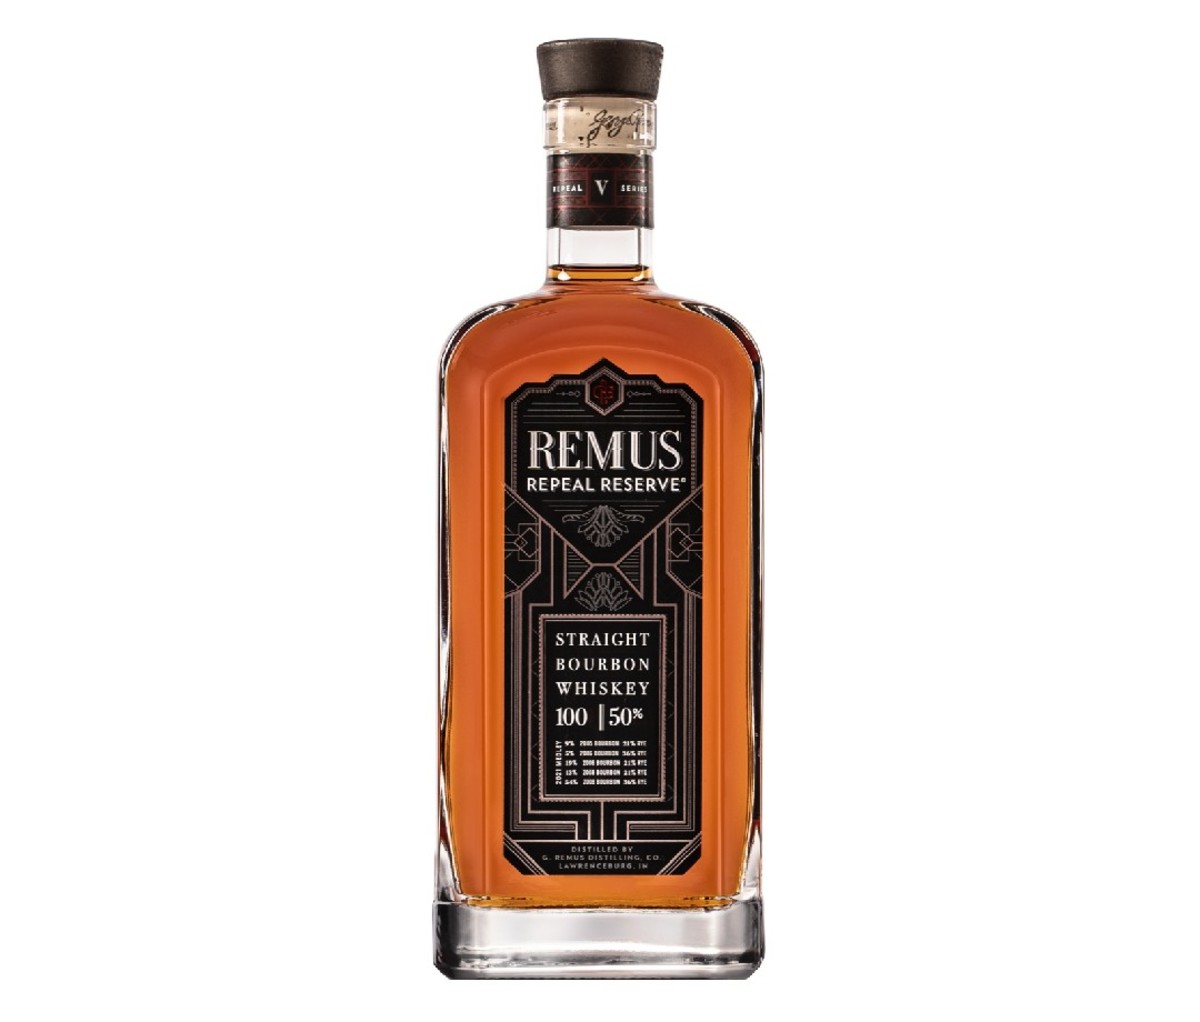 A bottle of Remus Repeal Reserve that is scheduled to be released in September 2021.